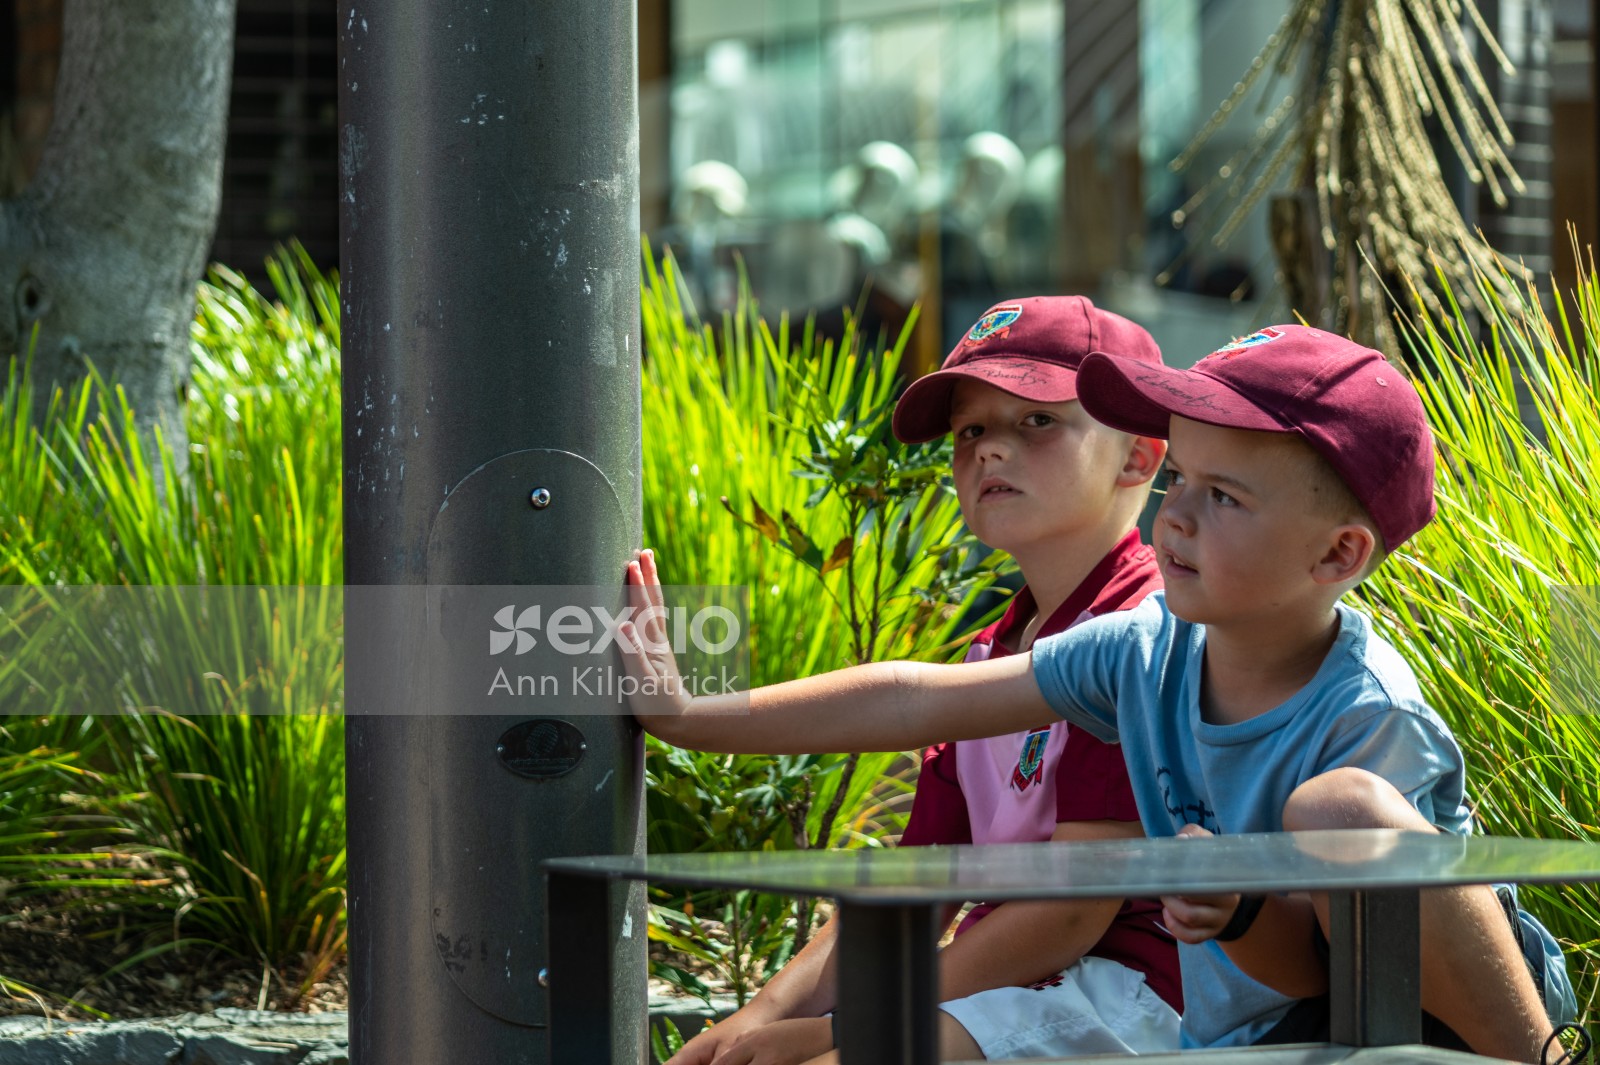 Two young boys watching a busker